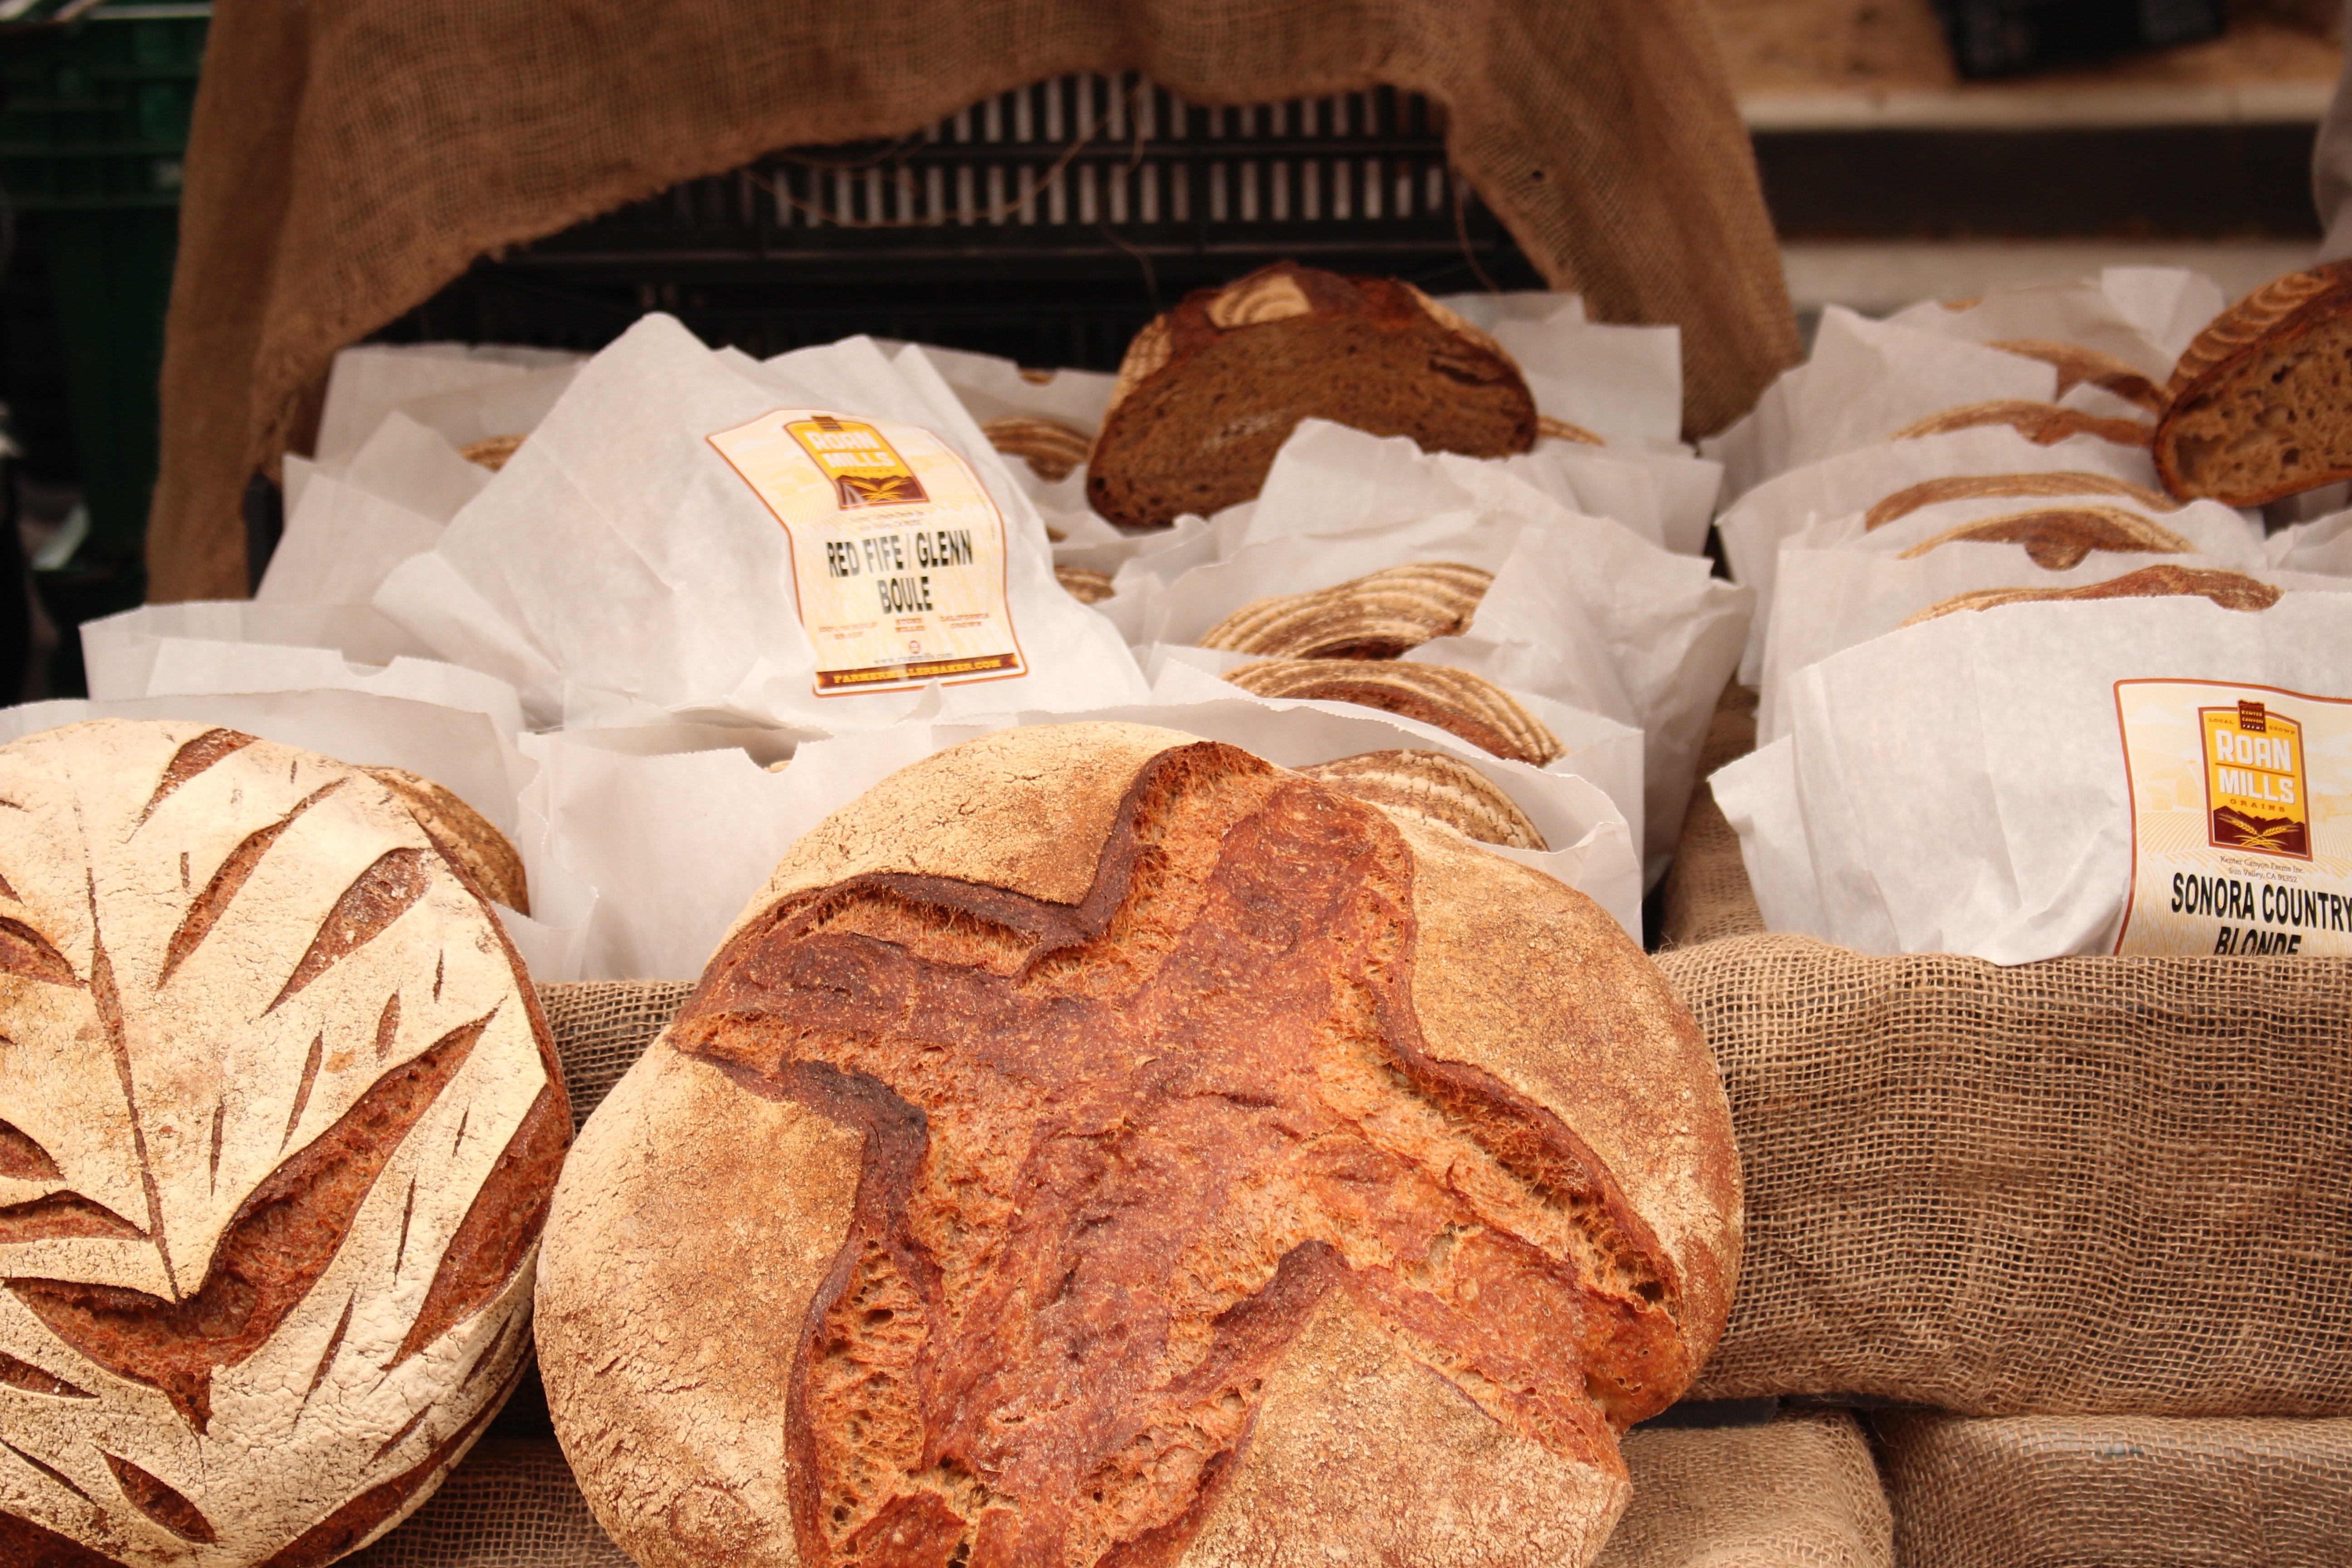 Delicious fresh bread — arriving in perfect condition from direct store delivery!